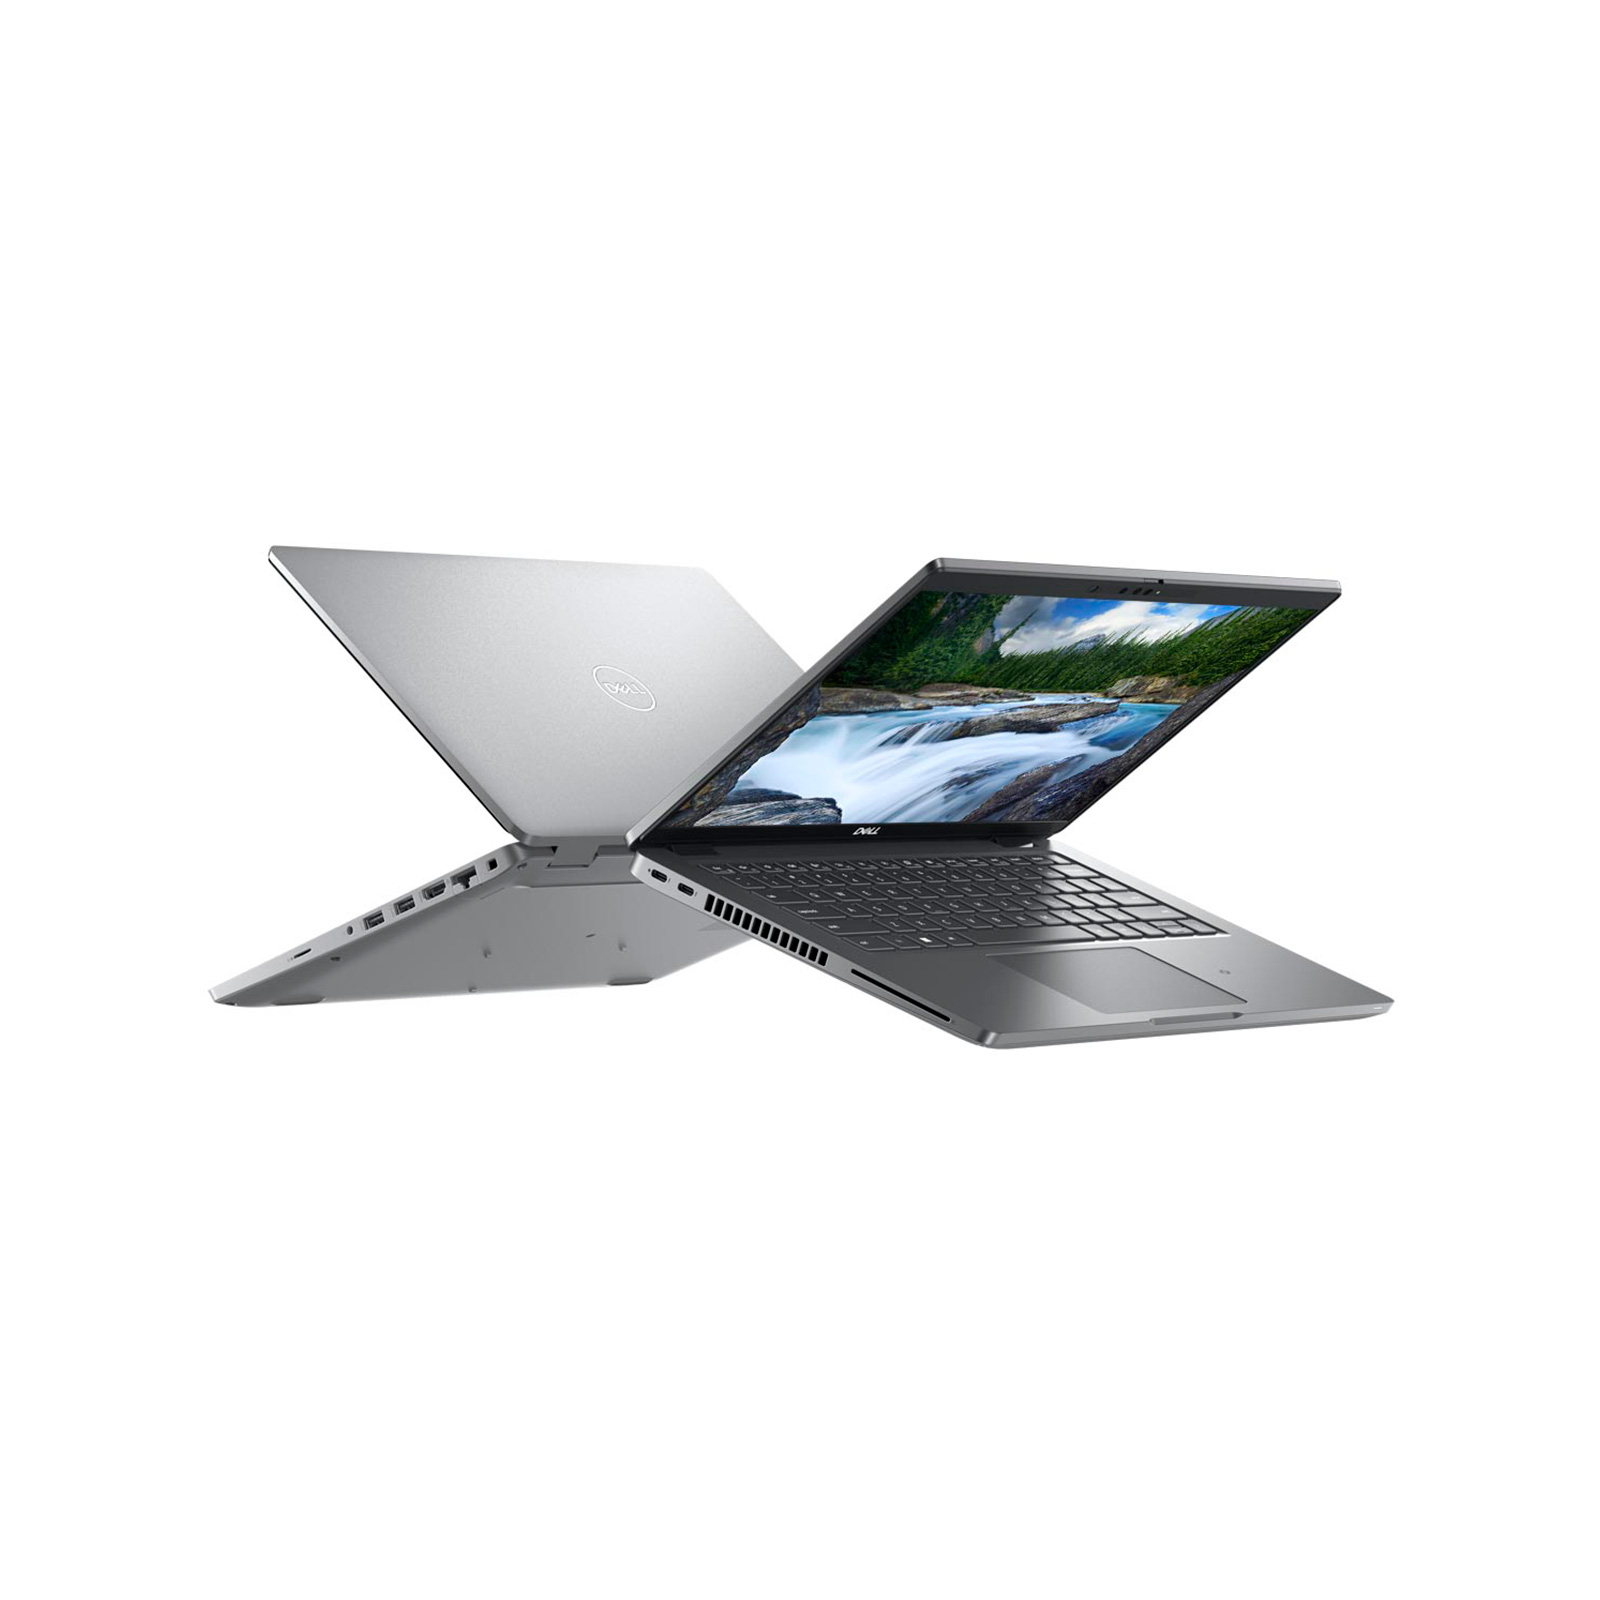 Dell-N205L5430MLK14EMEA-Dell-N205L5430MLK14EMEA-N205L5430MLK14EMEA-Laptops | LaptopSA.co.za a division of the notebook company 